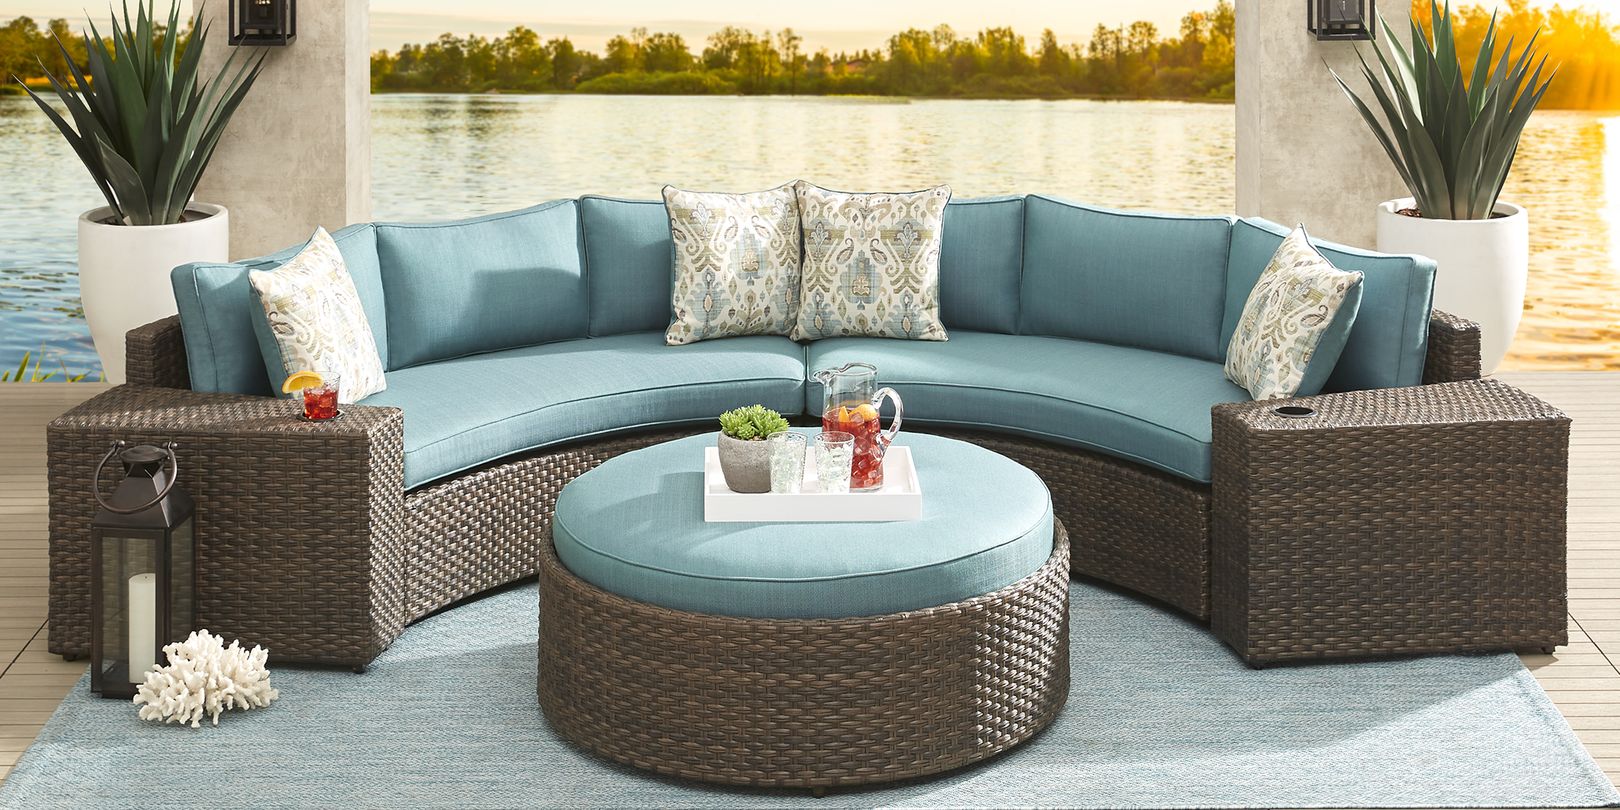 Photo of curved brown wicker sectional and round ottoman